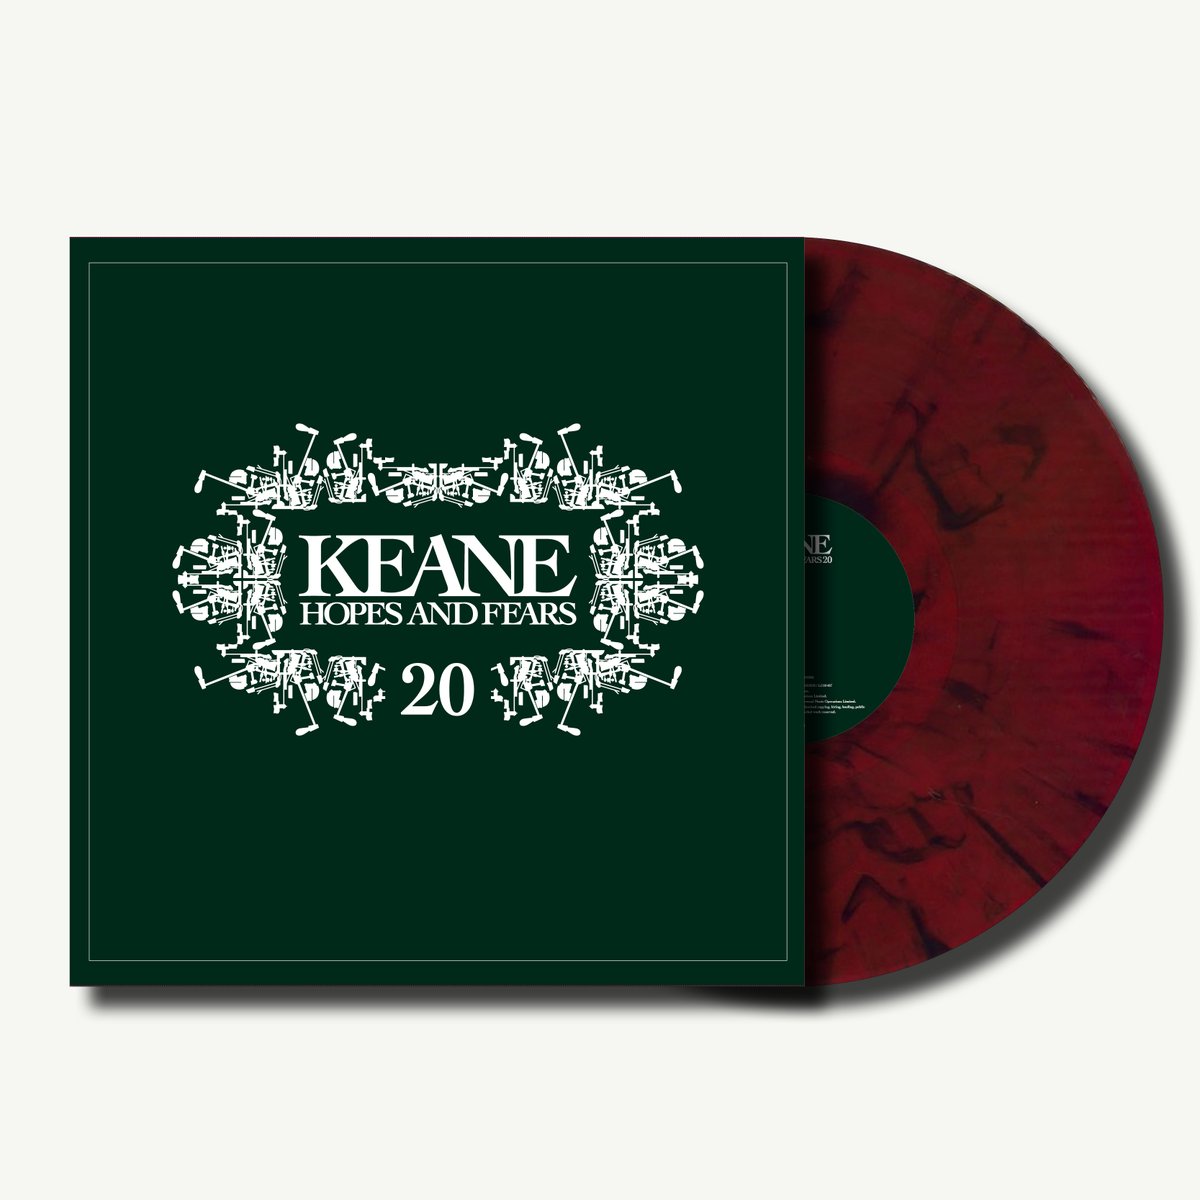 NEW DROP! @keaneofficial's debut album and the UK’s second best selling album of 2004, 'Hopes and Fears' comes exclusively pressed to red-and-black marble LP, limited to 750 copies and hand-numbered to order: blood-records.co.uk/products/keane